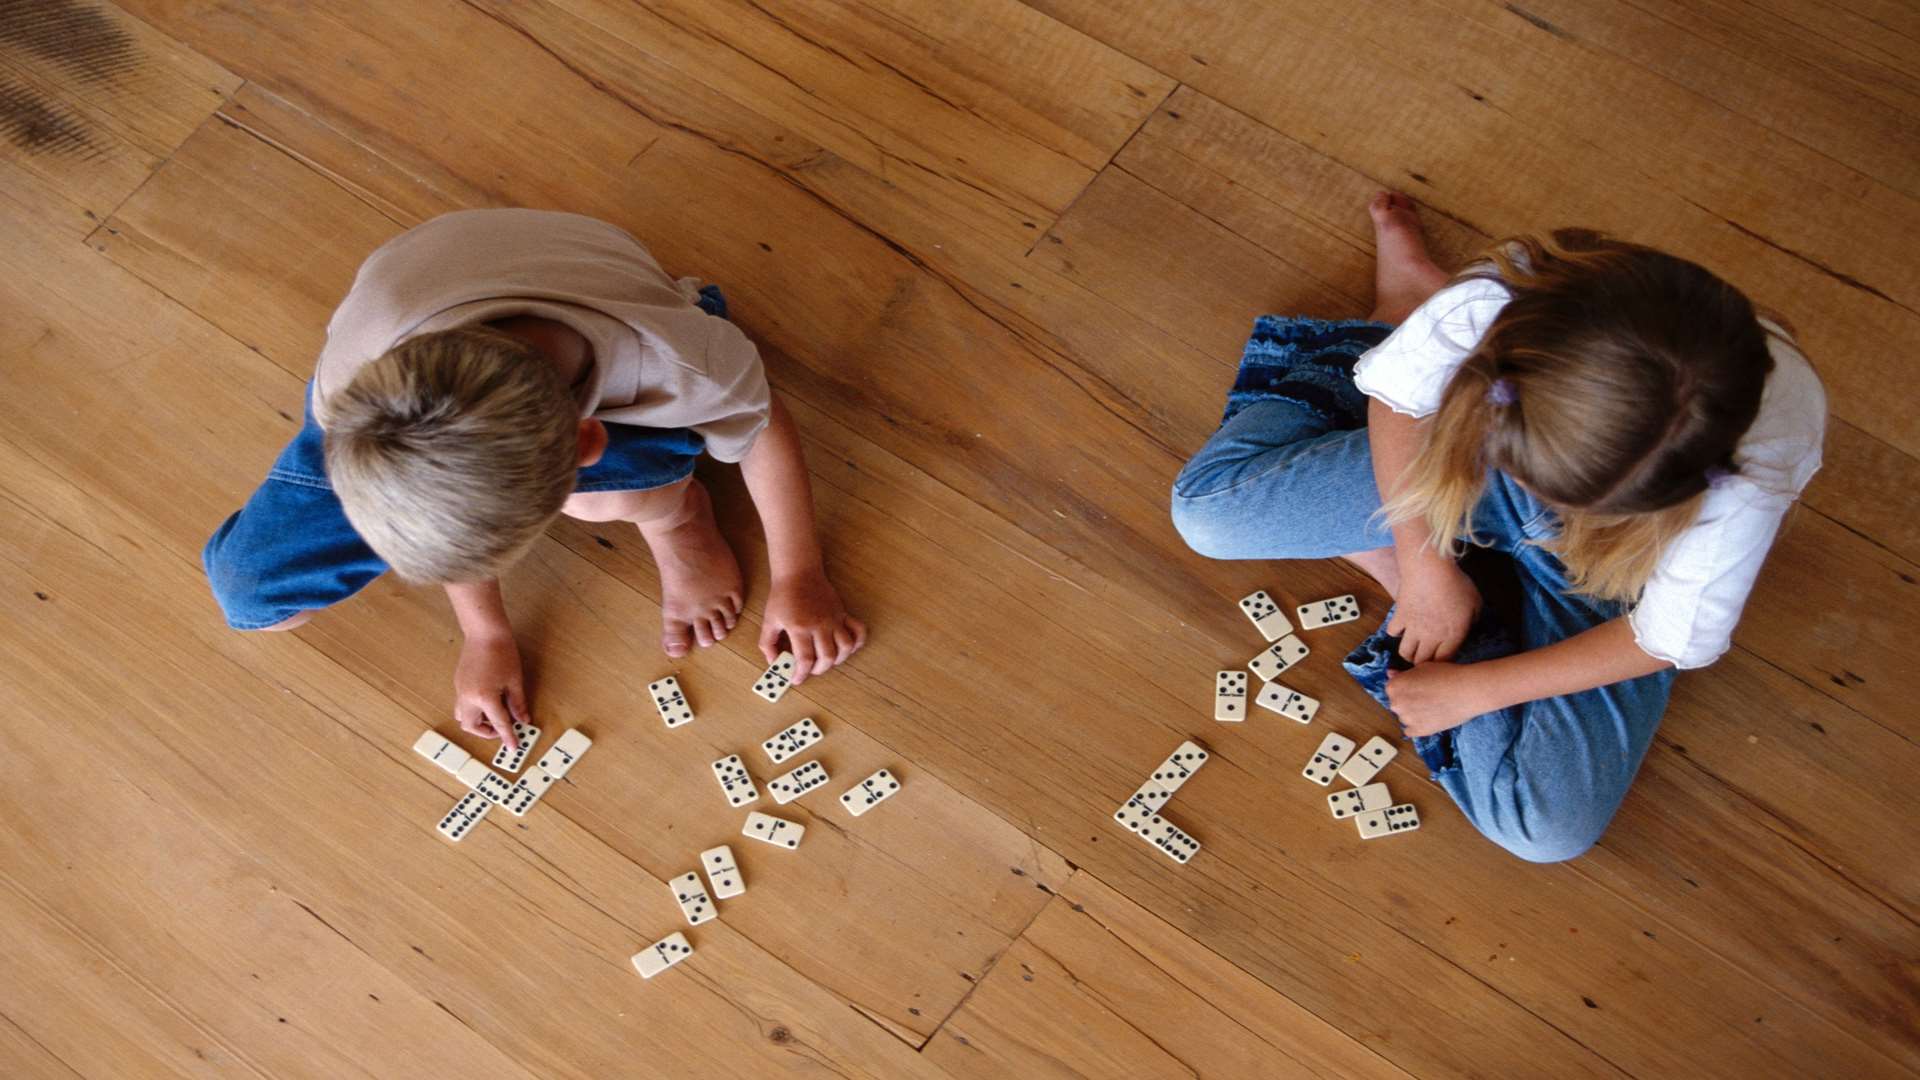 More than a third of families play board games and the like together